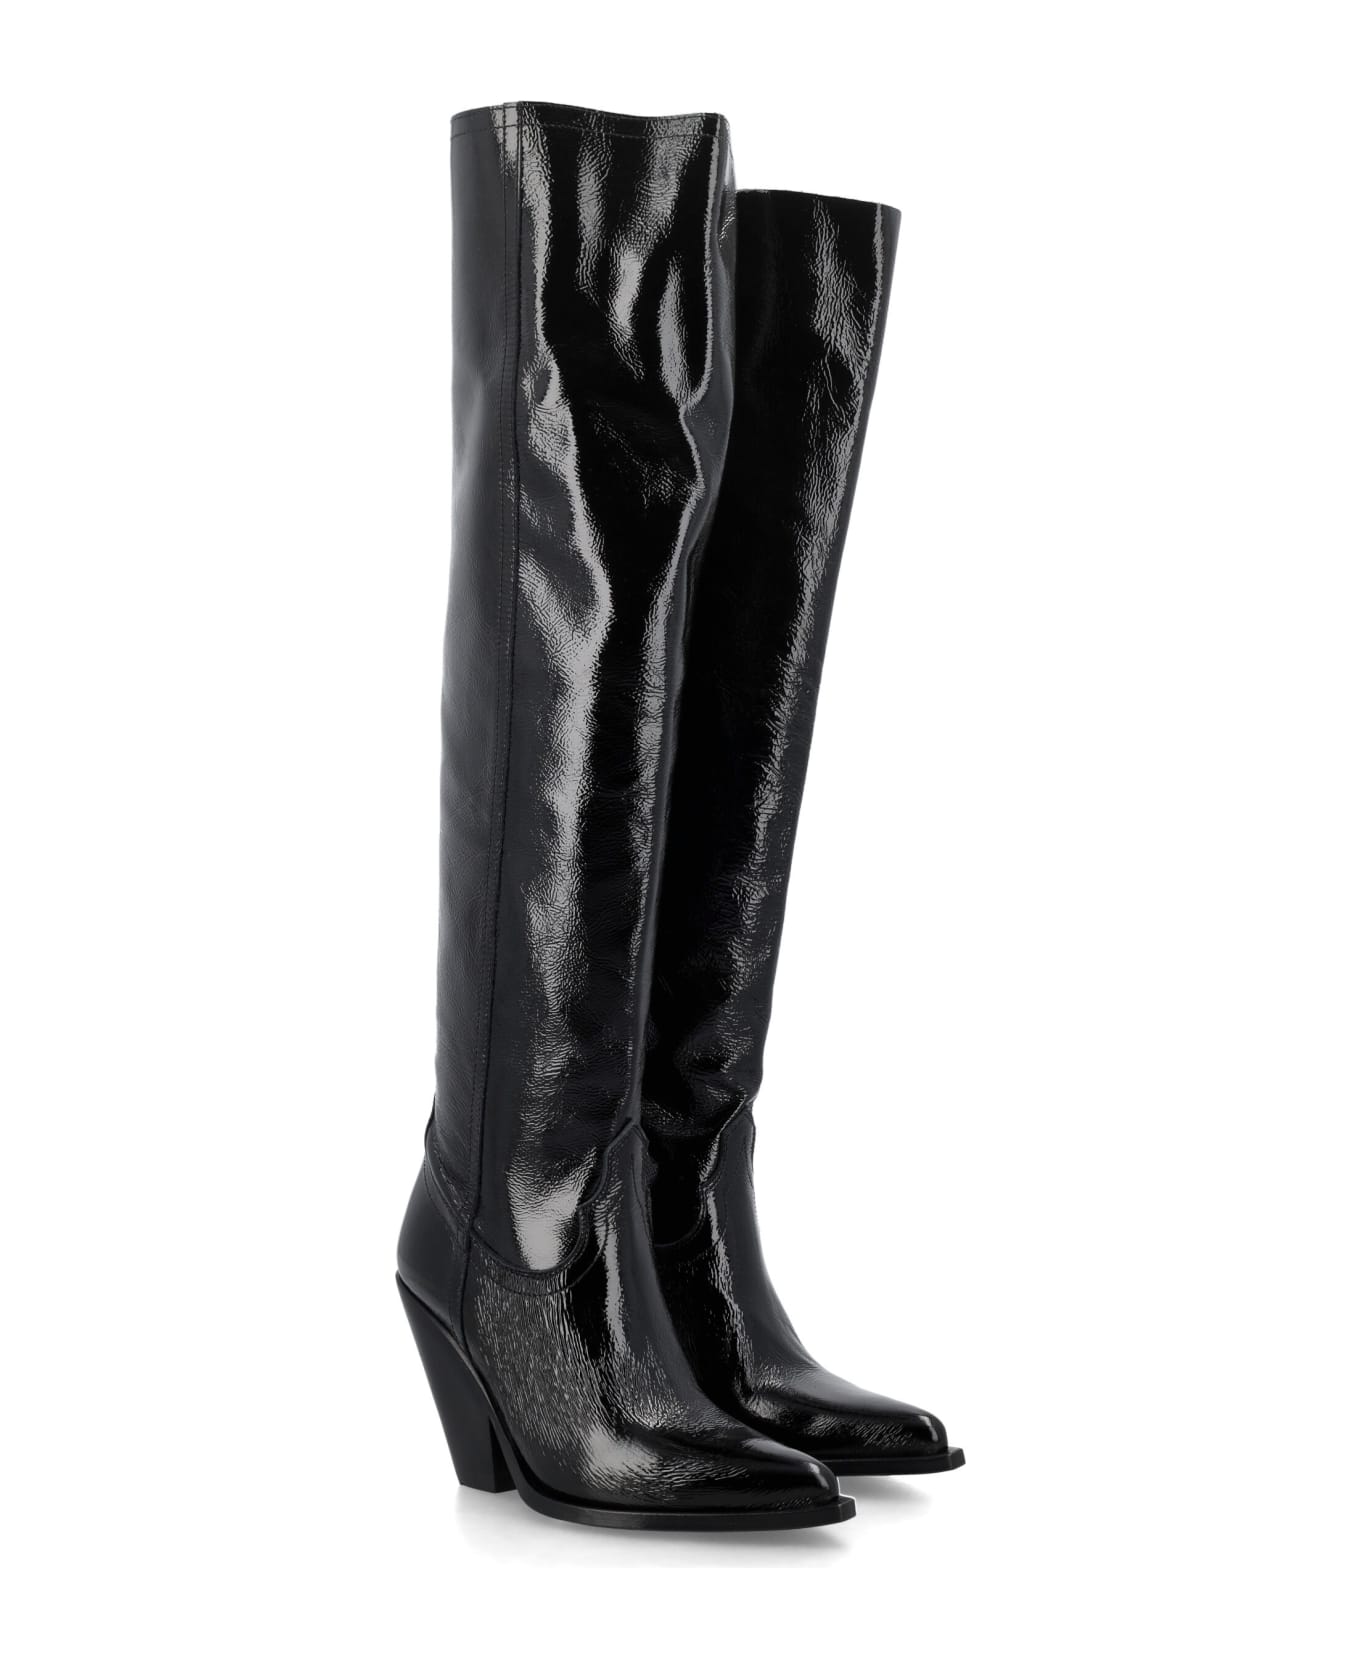 Sonora Acapulco Naplack Over-the-knee Boots - BLACK ブーツ